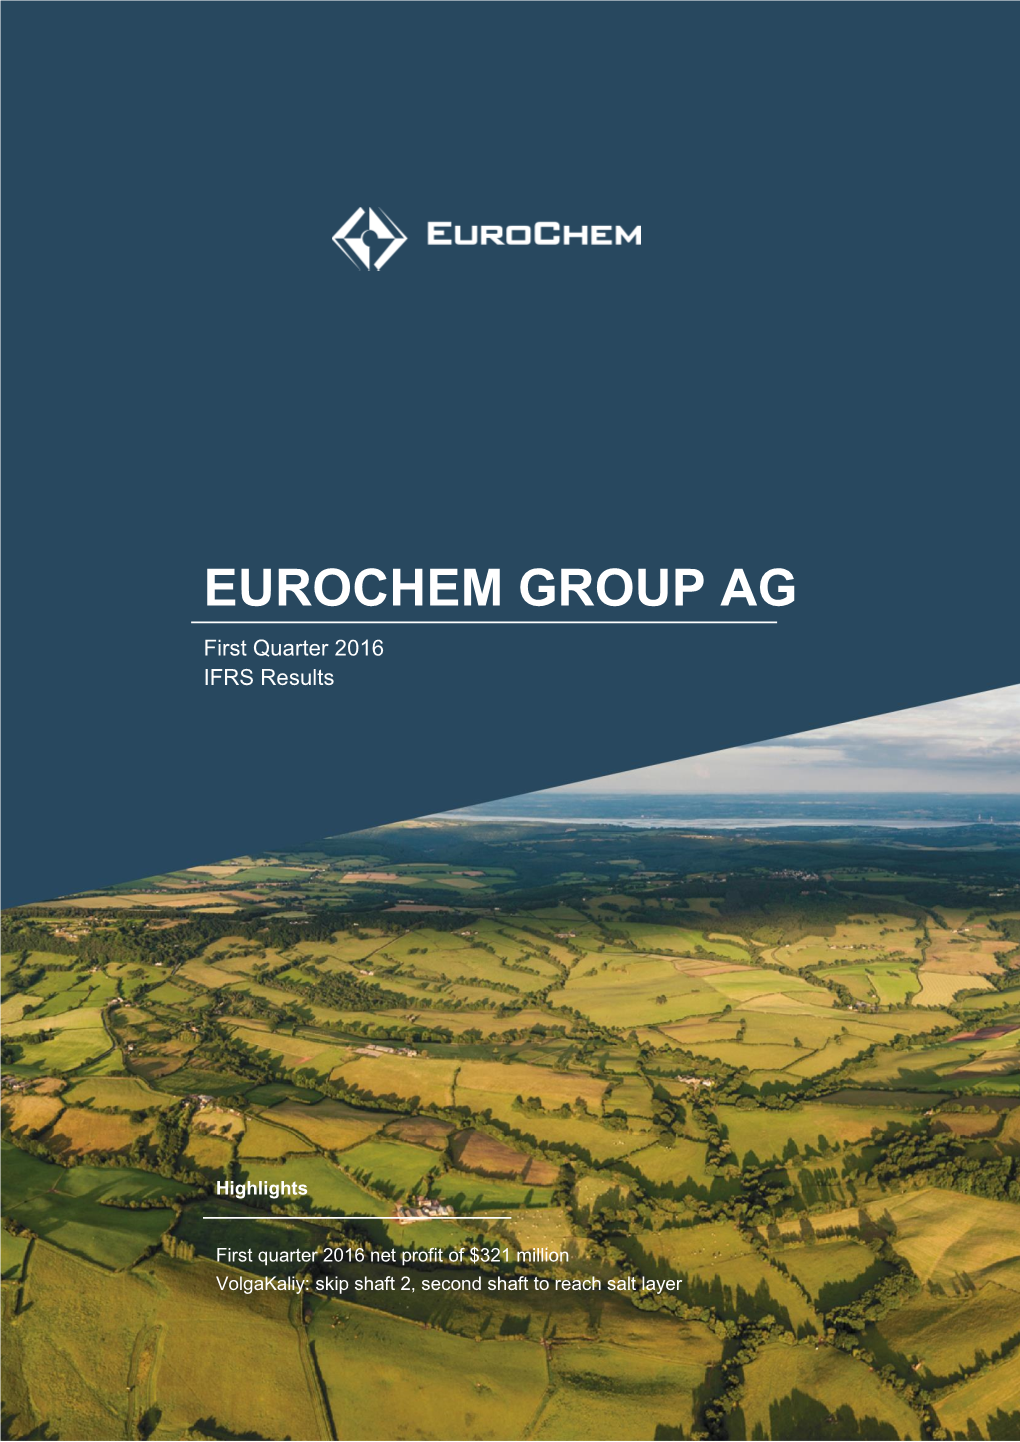 EUROCHEM GROUP AG First Quarter 2016 IFRS Results